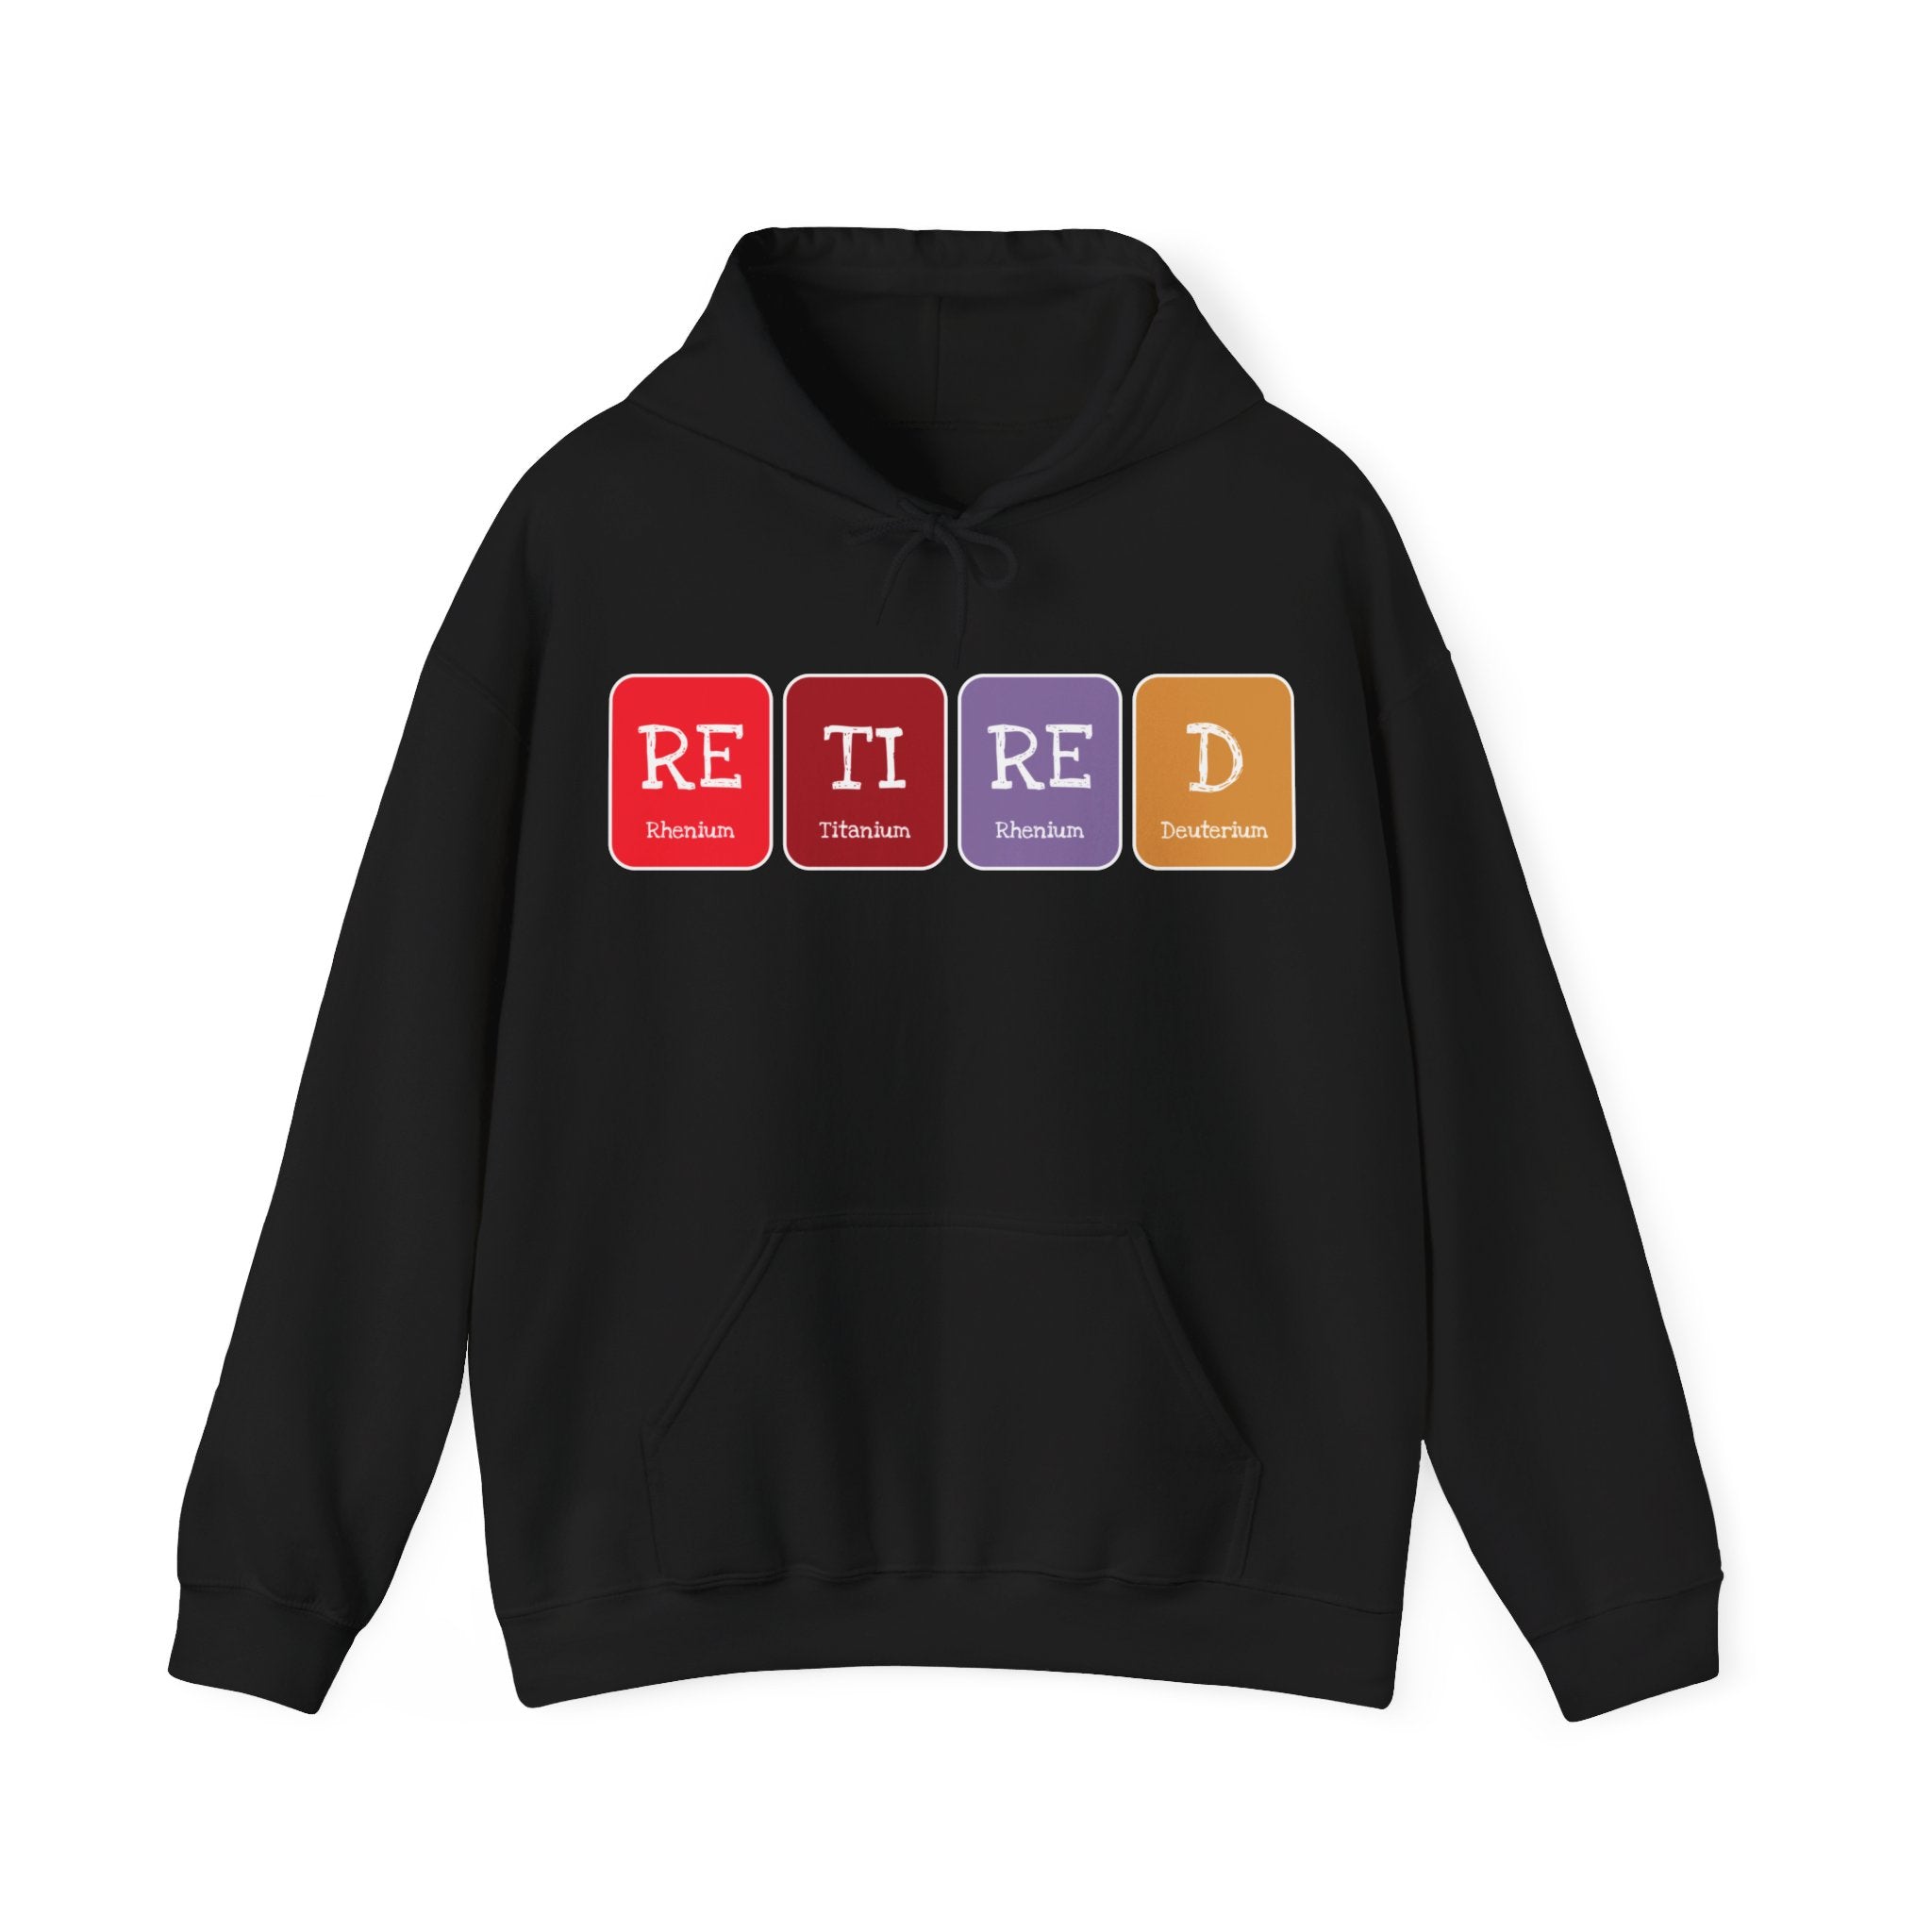 A Retired - Hooded Sweatshirt with a comfy fit, featuring the word "RETIRED" spelled out using periodic table-style elements: RE, T, I, RE, D—making it both a cozy and clever fashion statement.